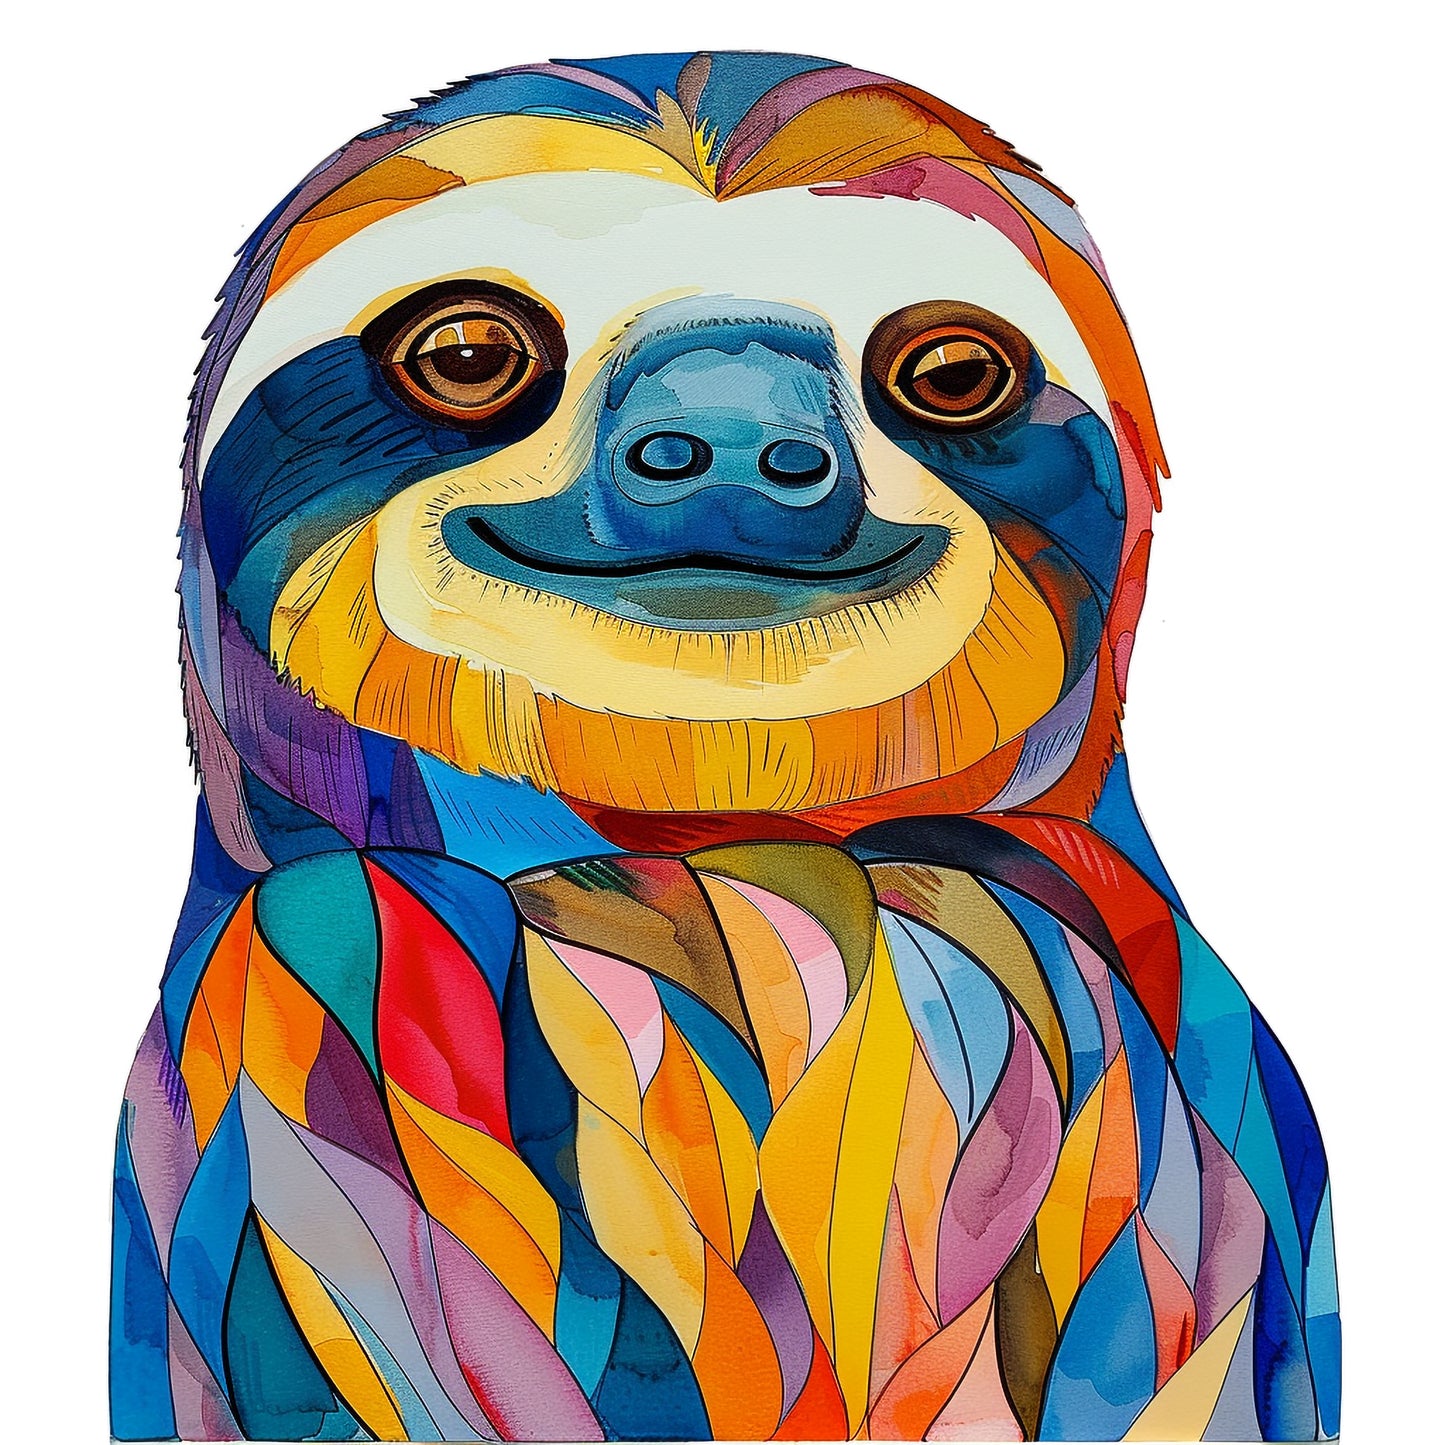 Colorful Cartoon Sloth with a Charming Smile Illustration